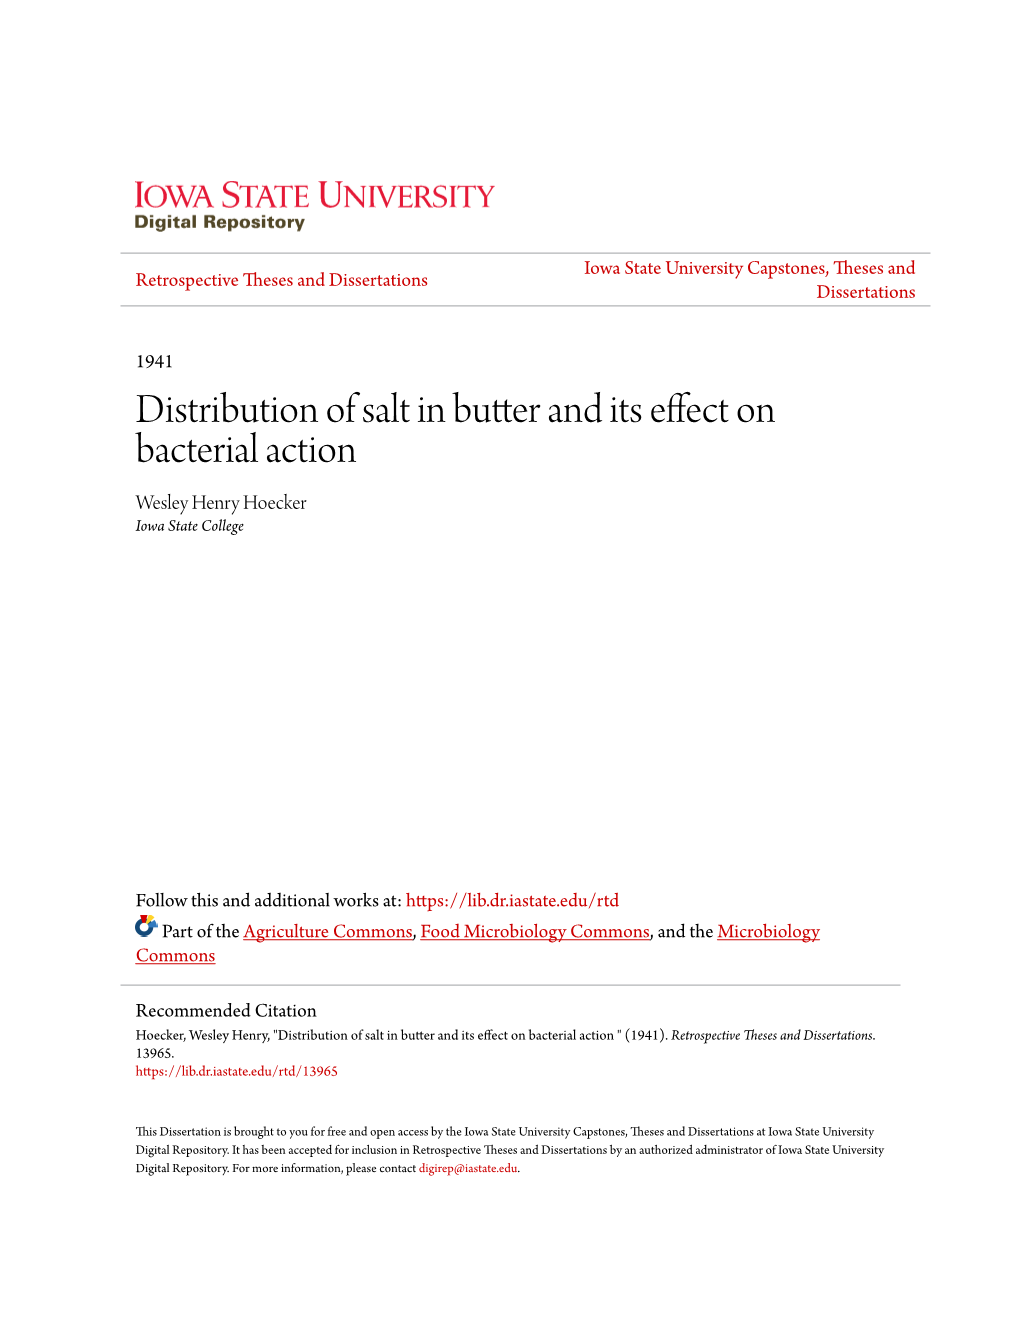 Distribution of Salt in Butter and Its Effect on Bacterial Action Wesley Henry Hoecker Iowa State College